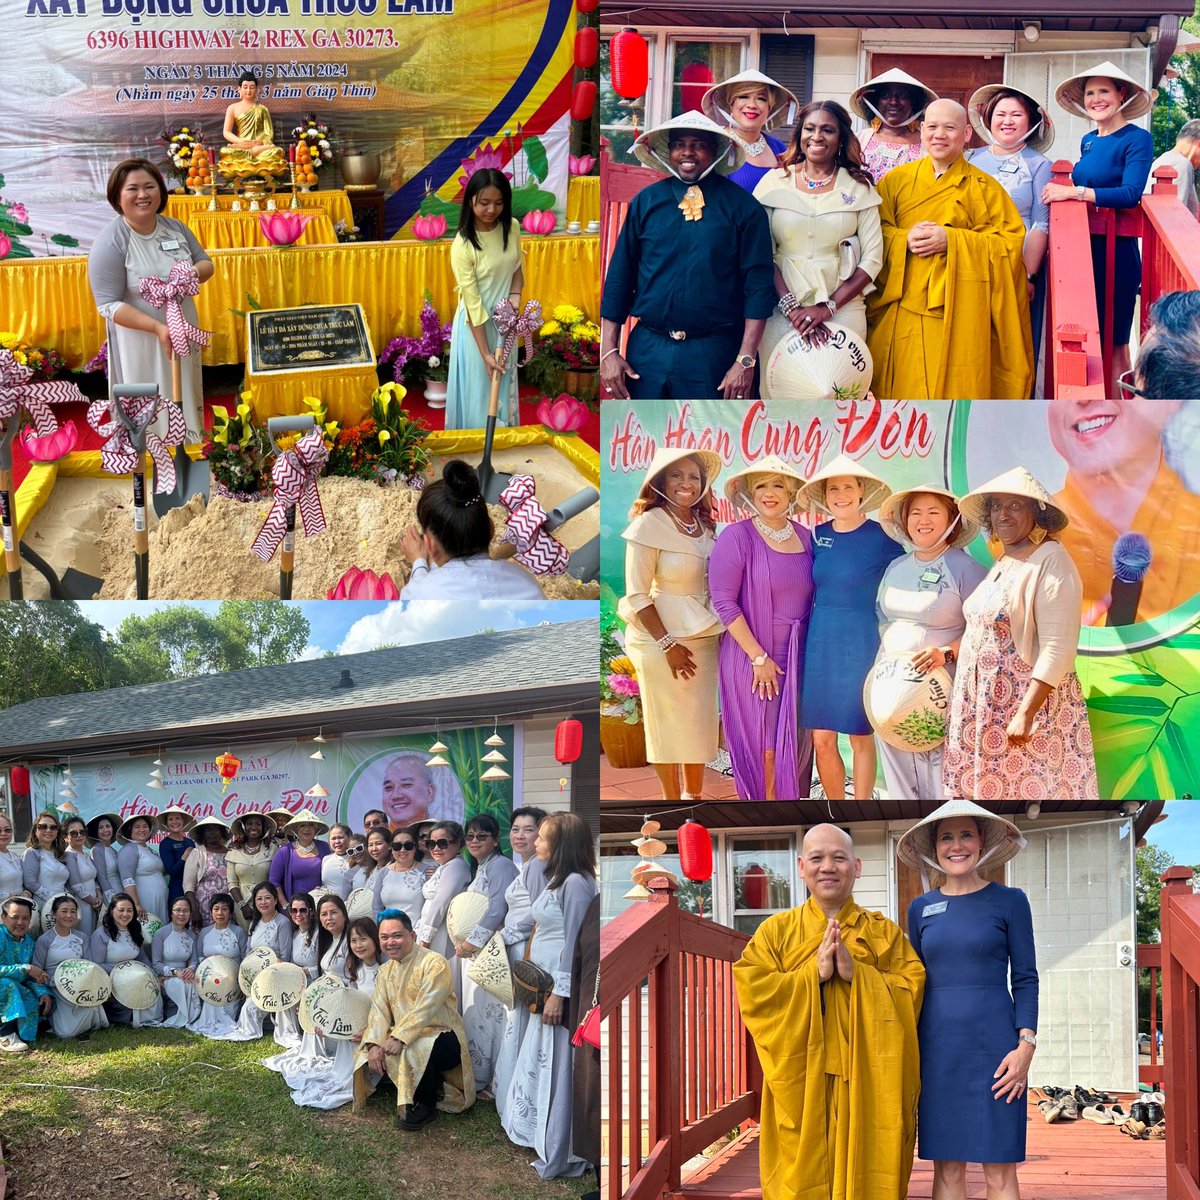 I was honored to attend the ground breaking of the new Truc Lam temple in Rex, Georgia, and celebratory dinner as a guest of Morrow Councilwoman Hue Nguyen! Congratulations on this momentous occasion! #gapol